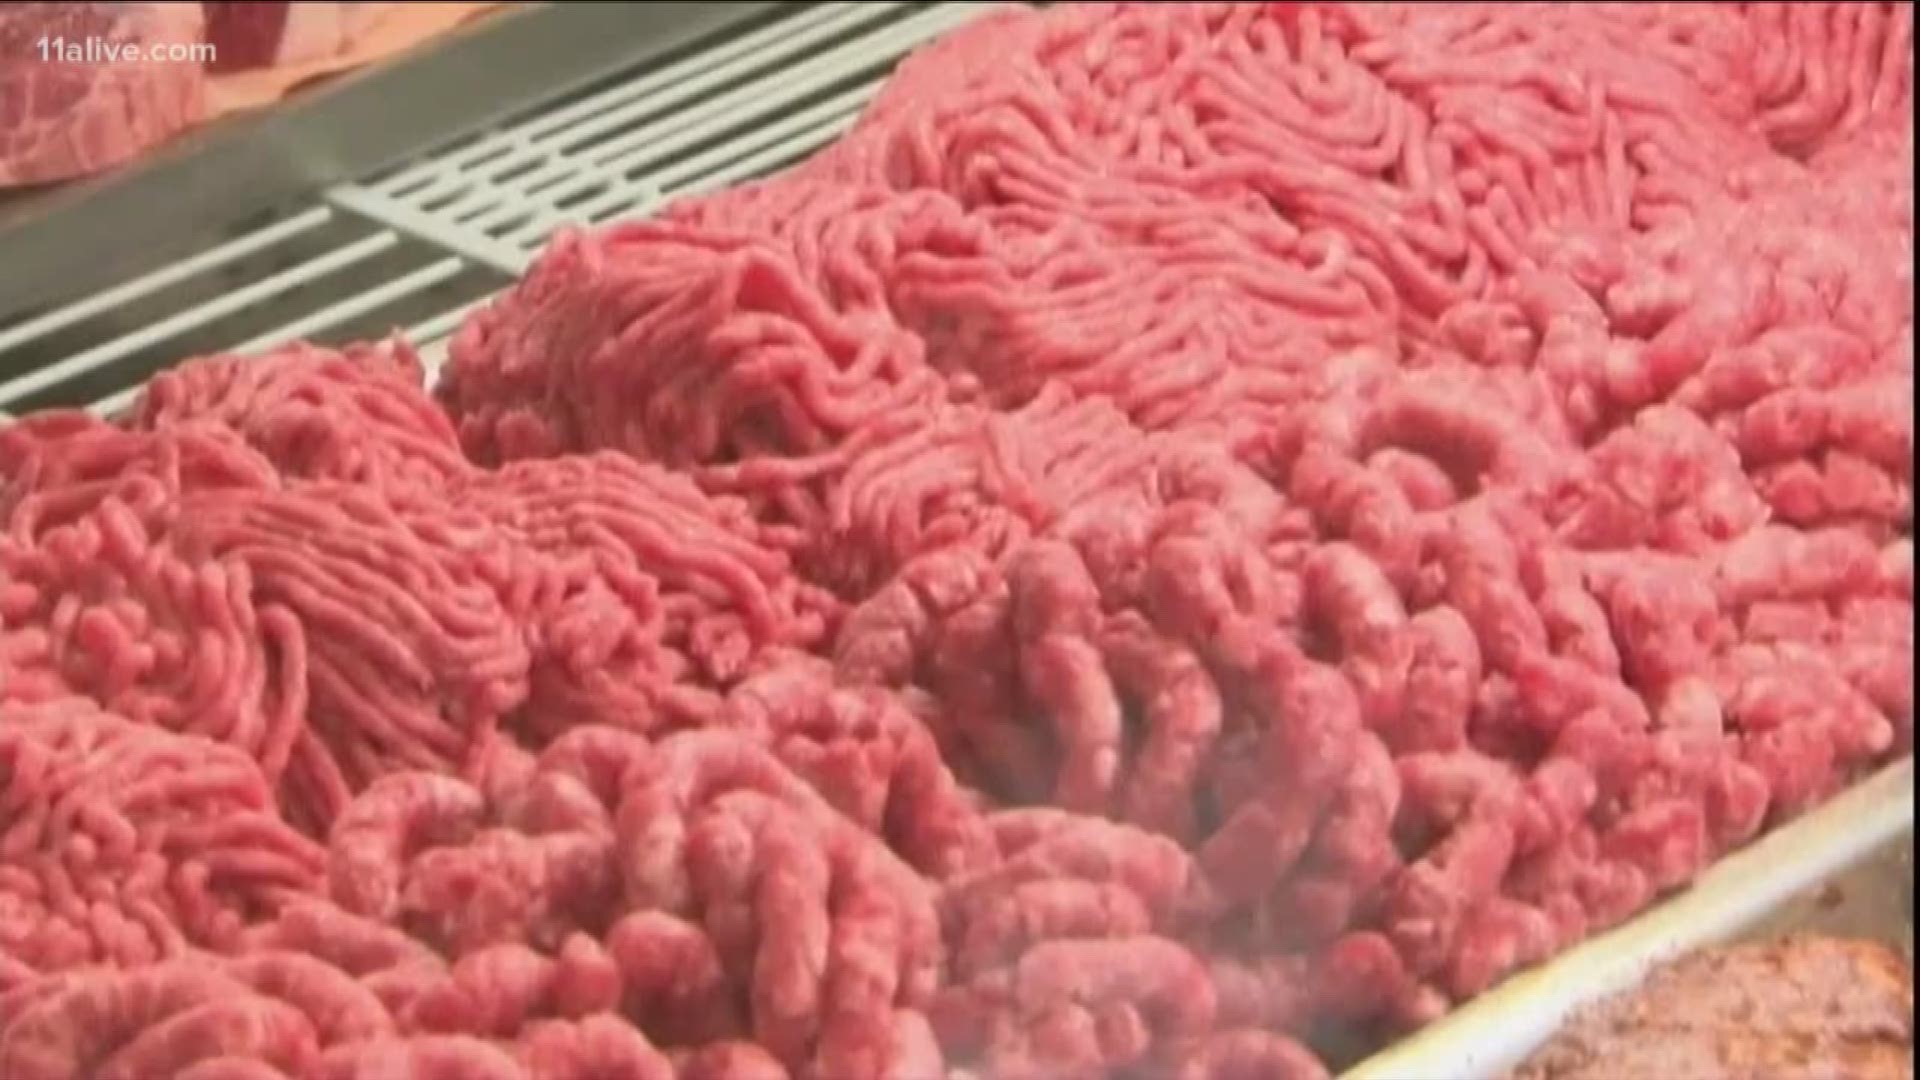 The recall is due to possible salmonella contamination.